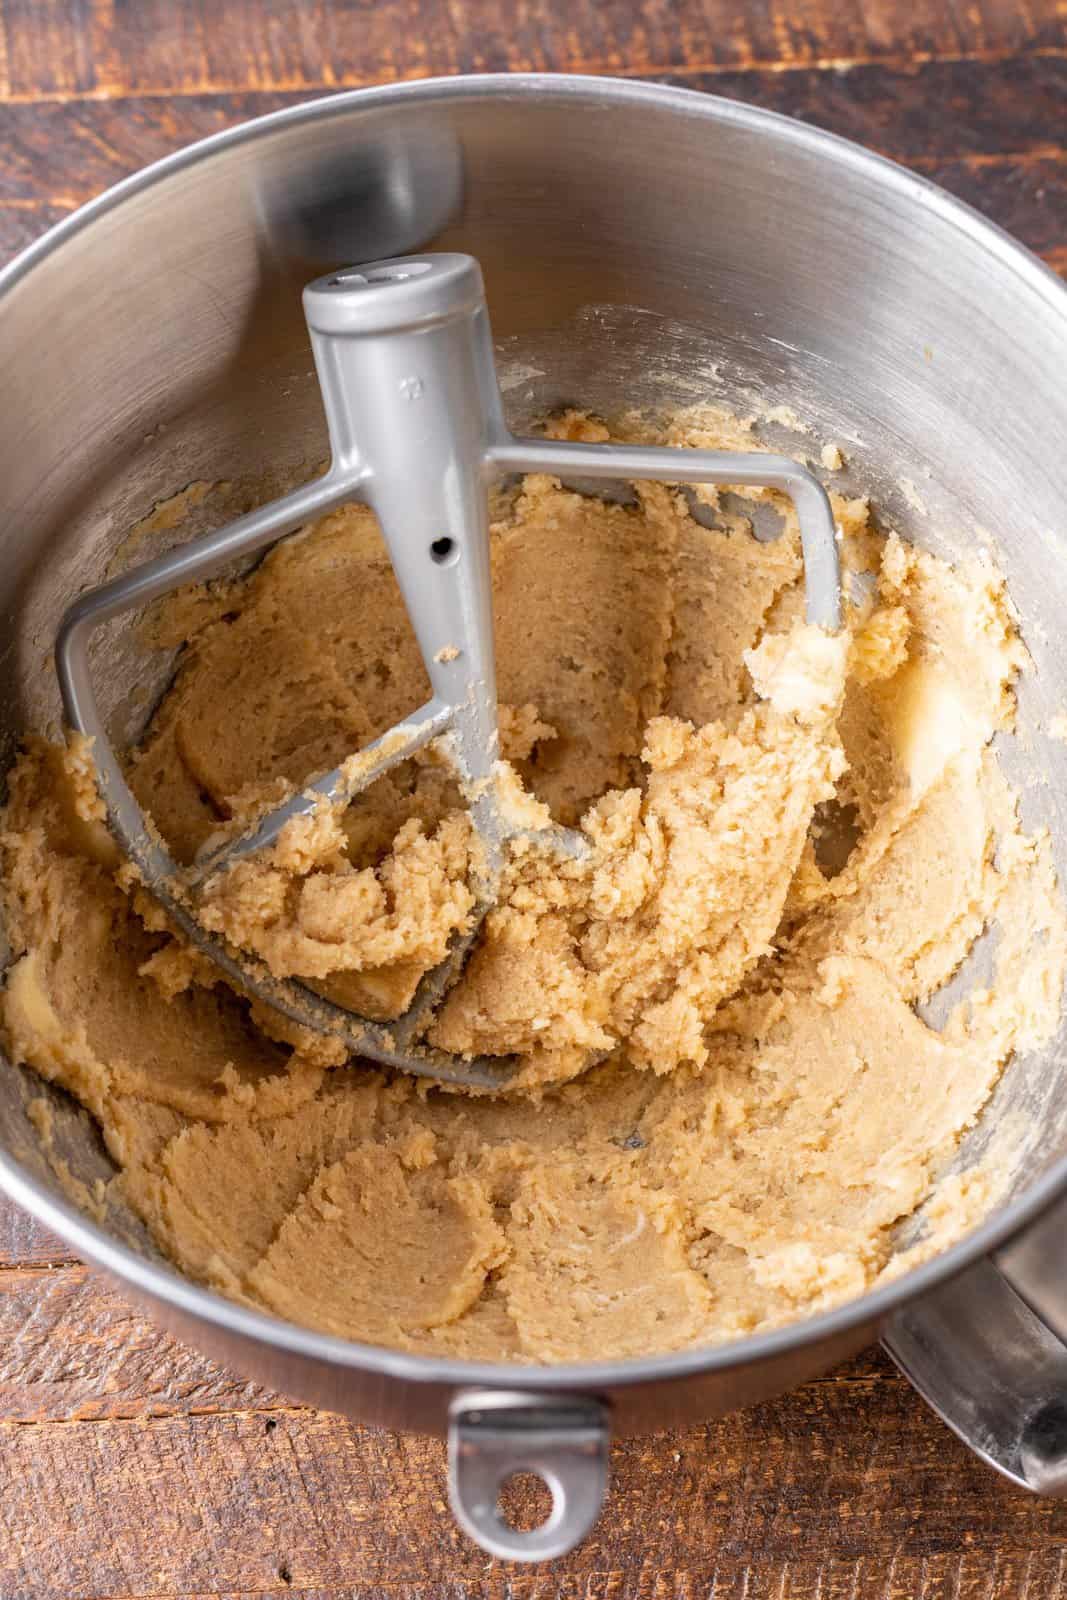 Butter, brown sugar, and granulated sugar being mixed in a mixing bowl.